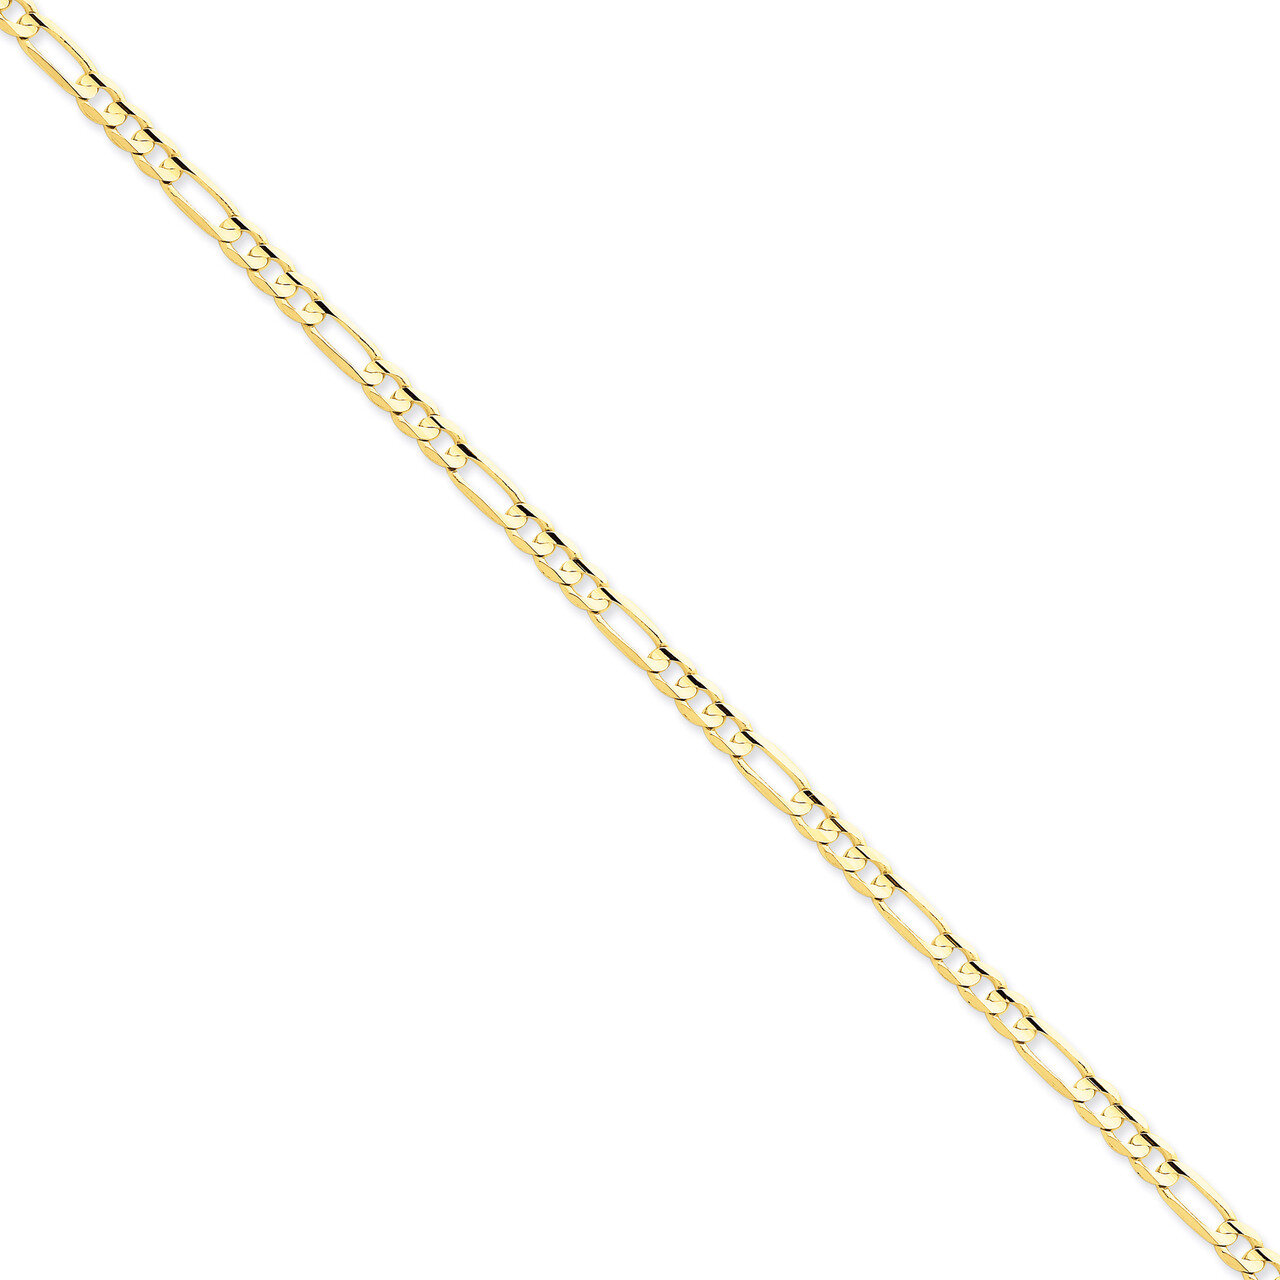 4.5mm Concave Open Figaro Chain 18 Inch 14k Gold LFG120-18